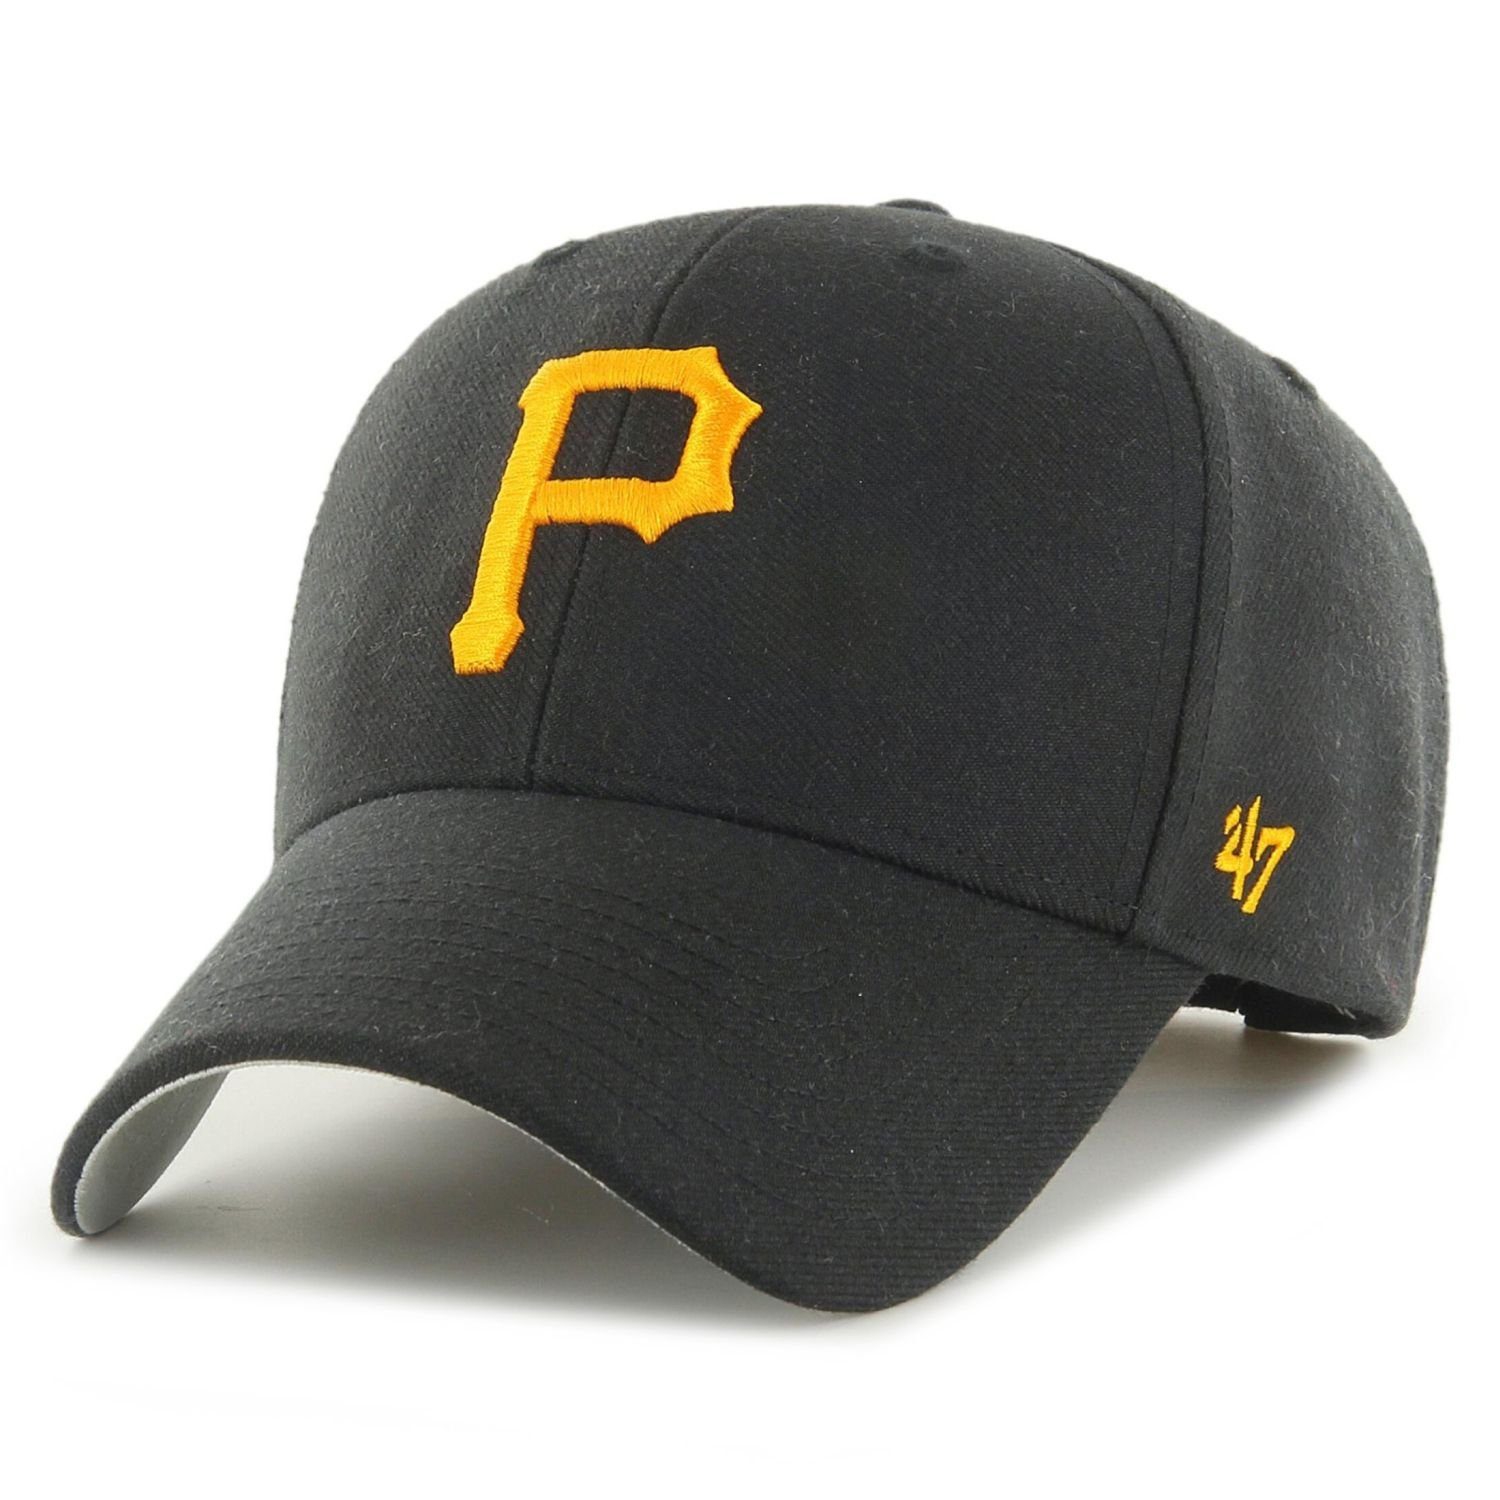 '47 Brand Trucker Cap Relaxed Fit MLB Pittsburgh Pirates